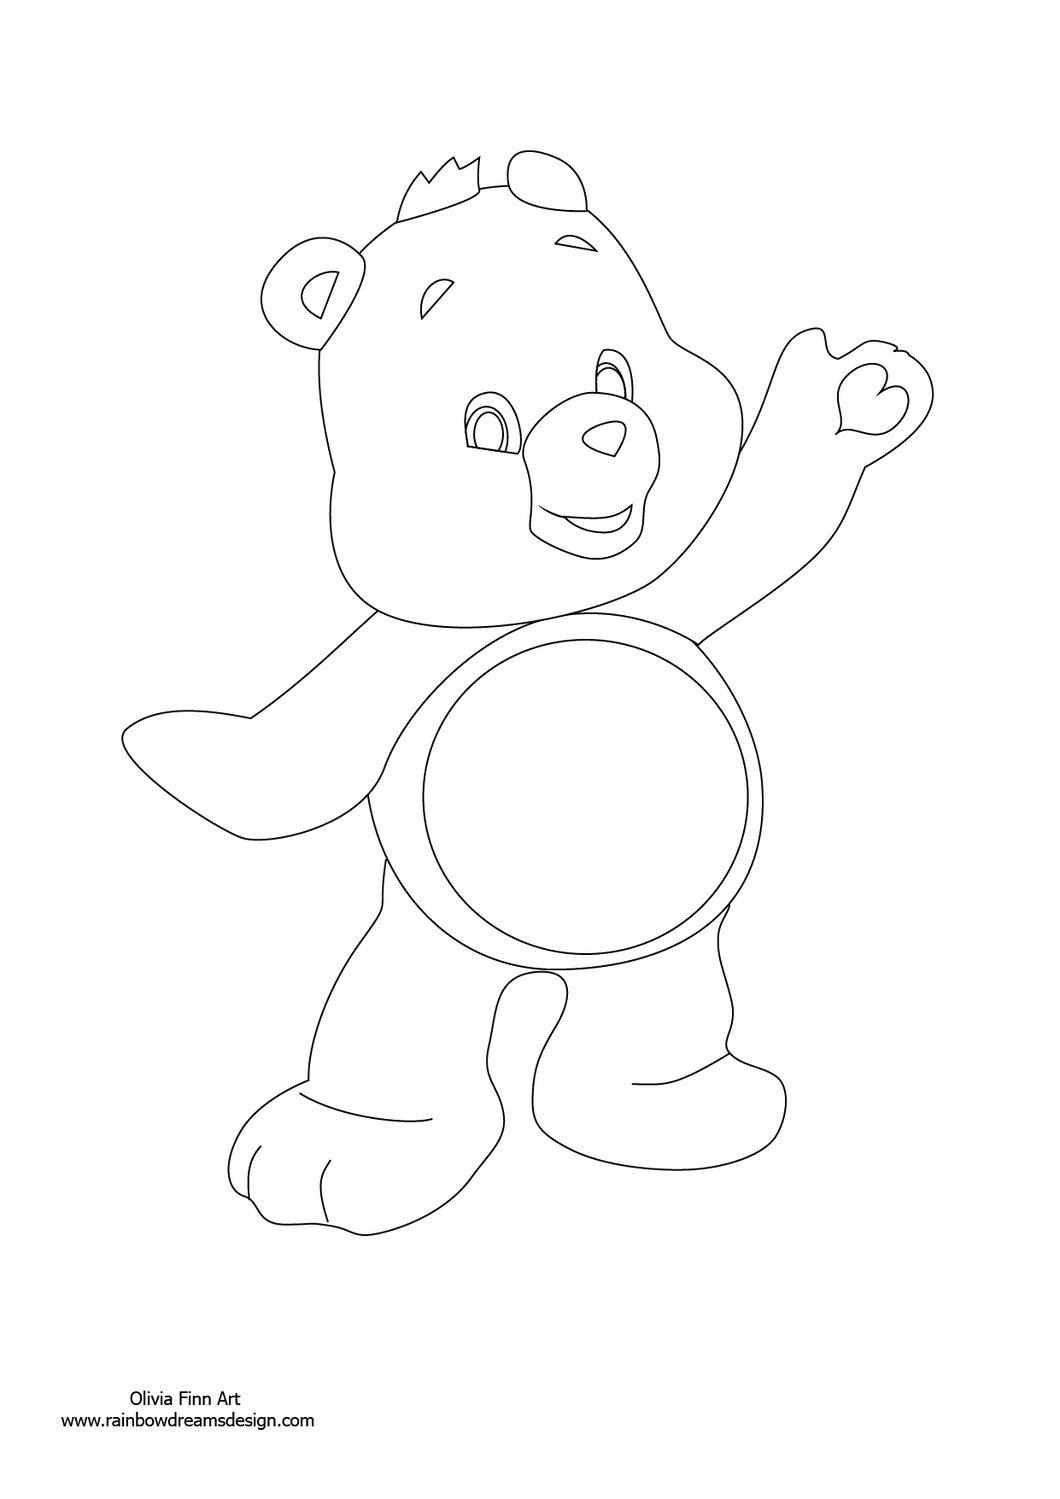 Colouring Page - Care Bear